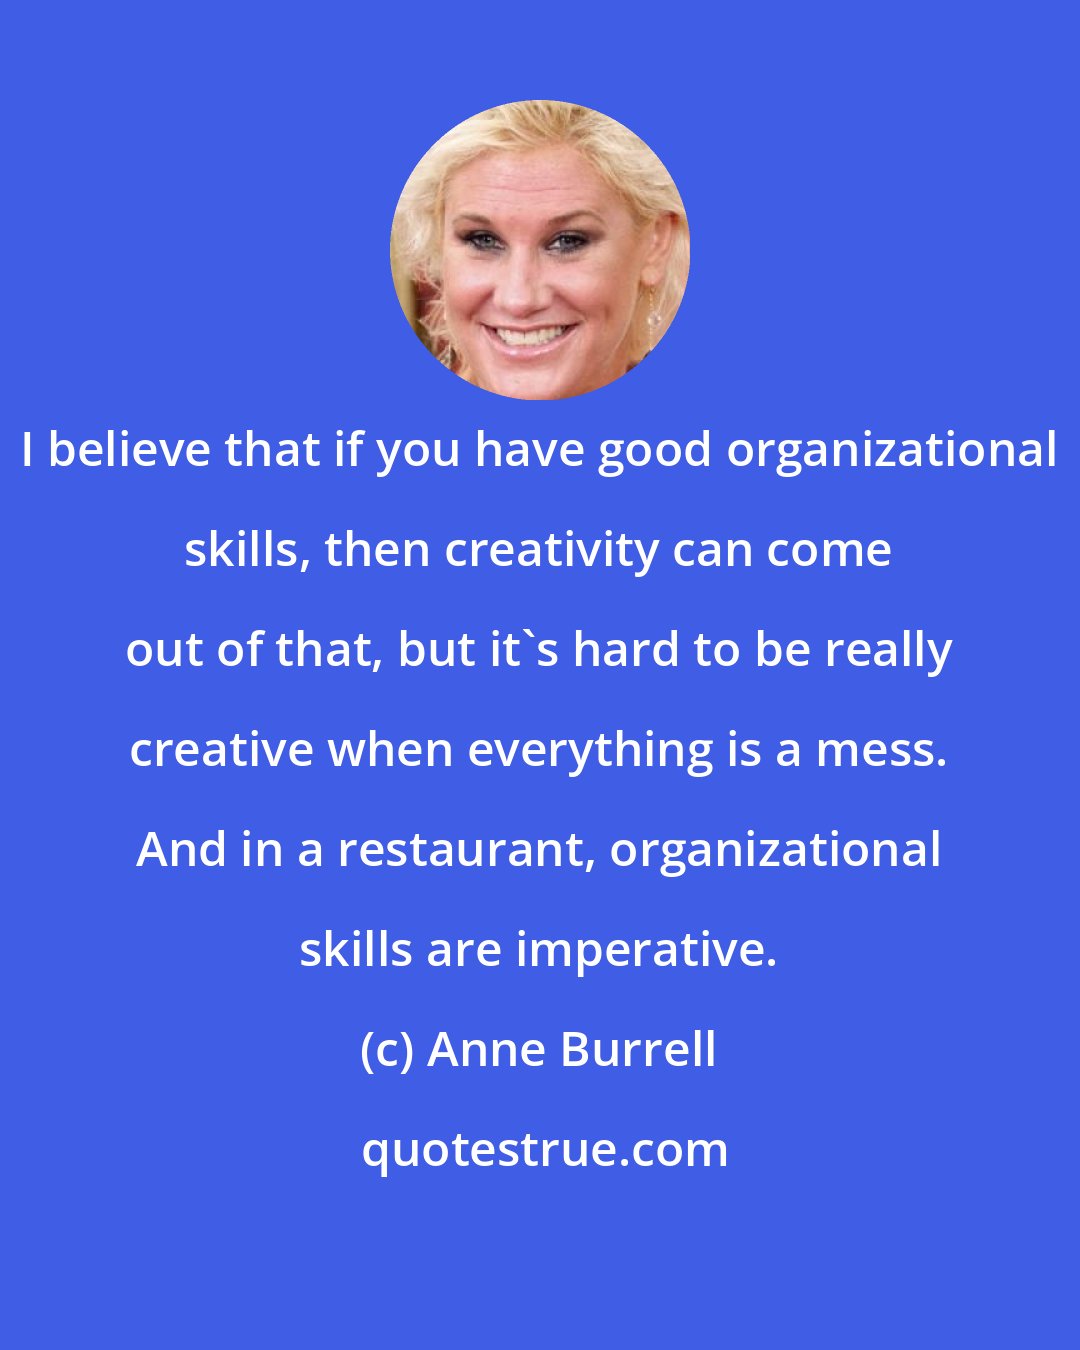 Anne Burrell: I believe that if you have good organizational skills, then creativity can come out of that, but it's hard to be really creative when everything is a mess. And in a restaurant, organizational skills are imperative.